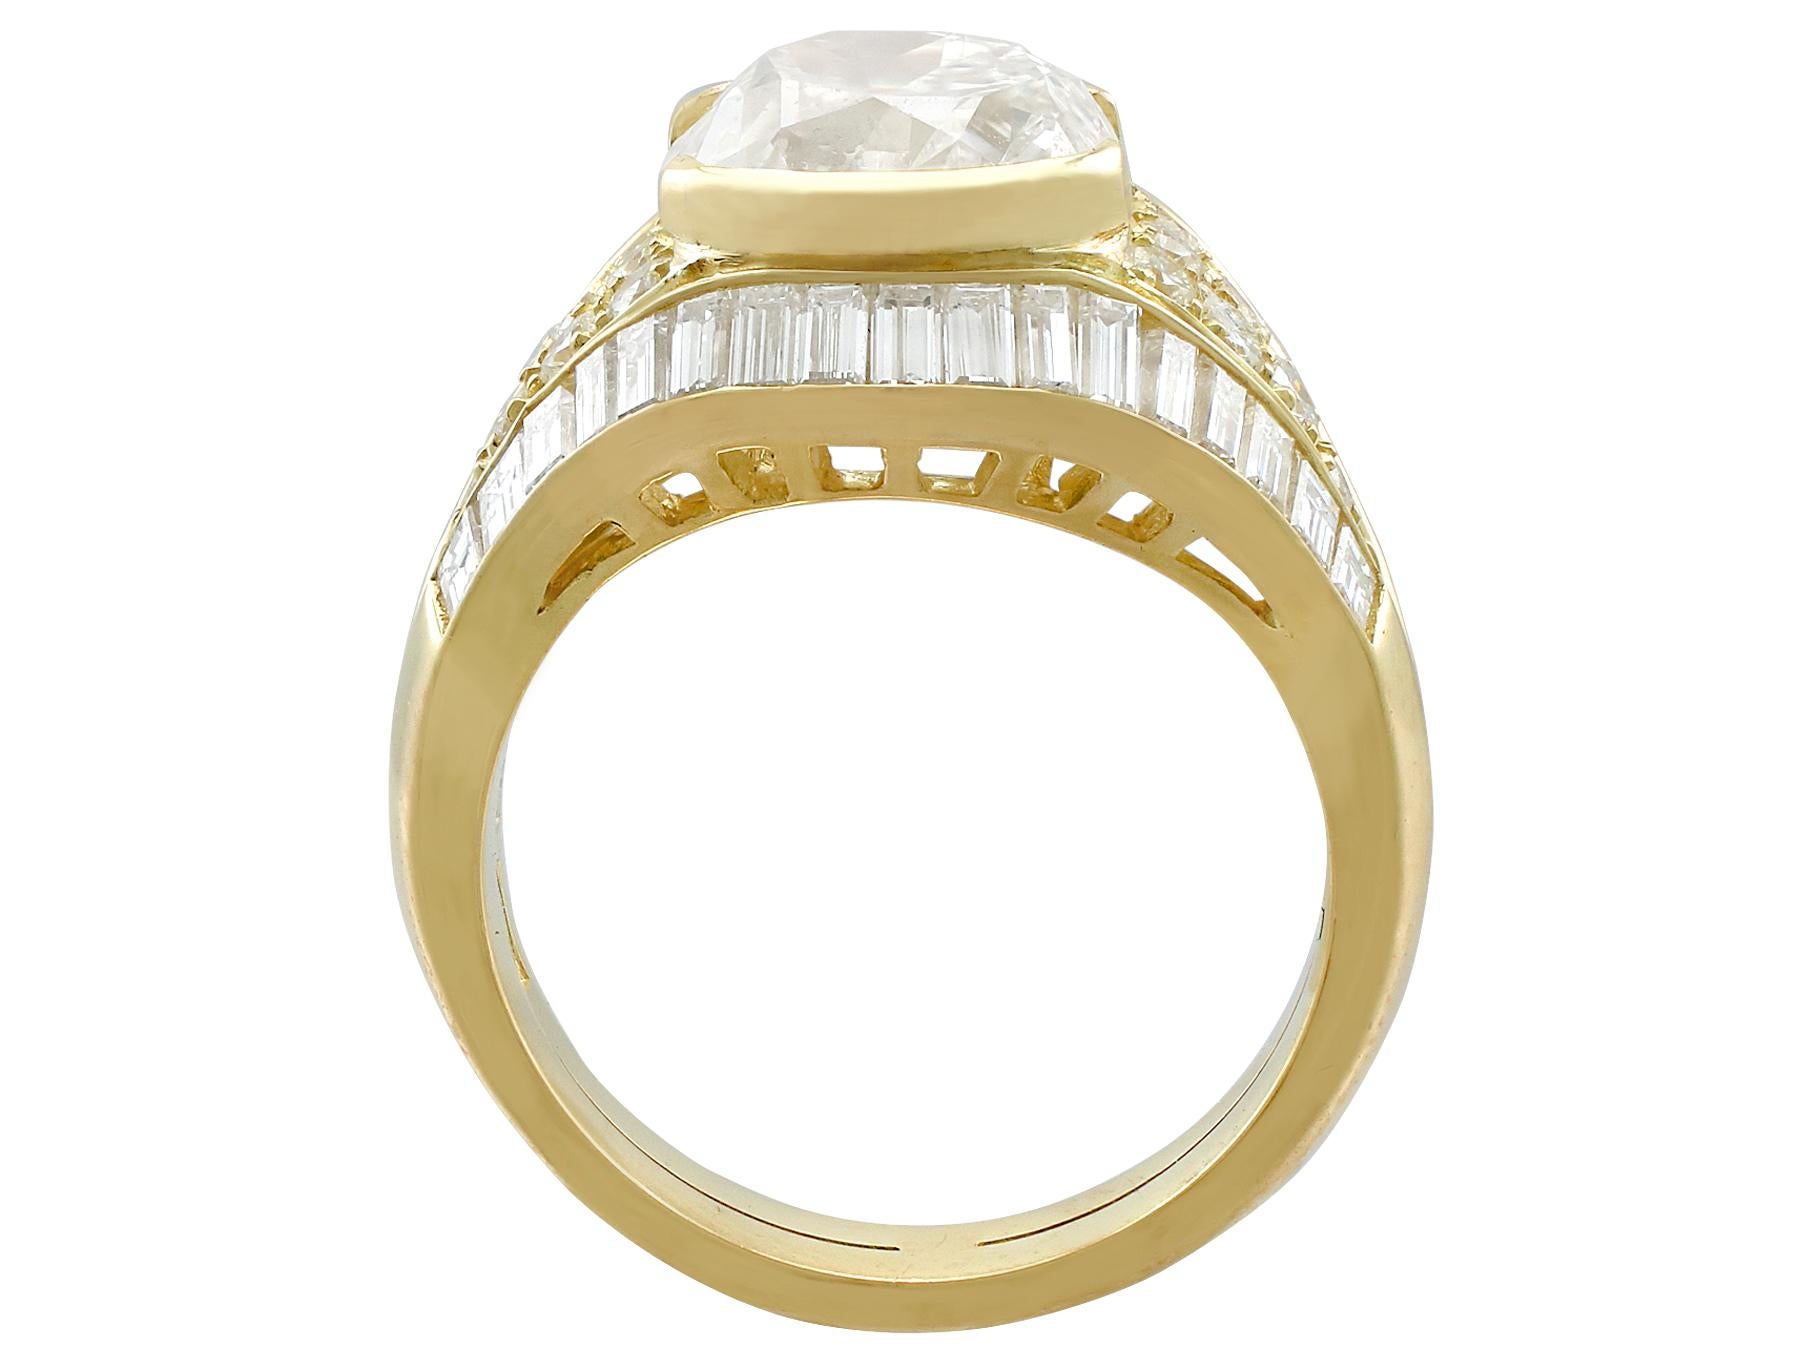 Old European Cut Antique and Vintage Italian 6.11 Carat Diamond Yellow Gold Cocktail Ring